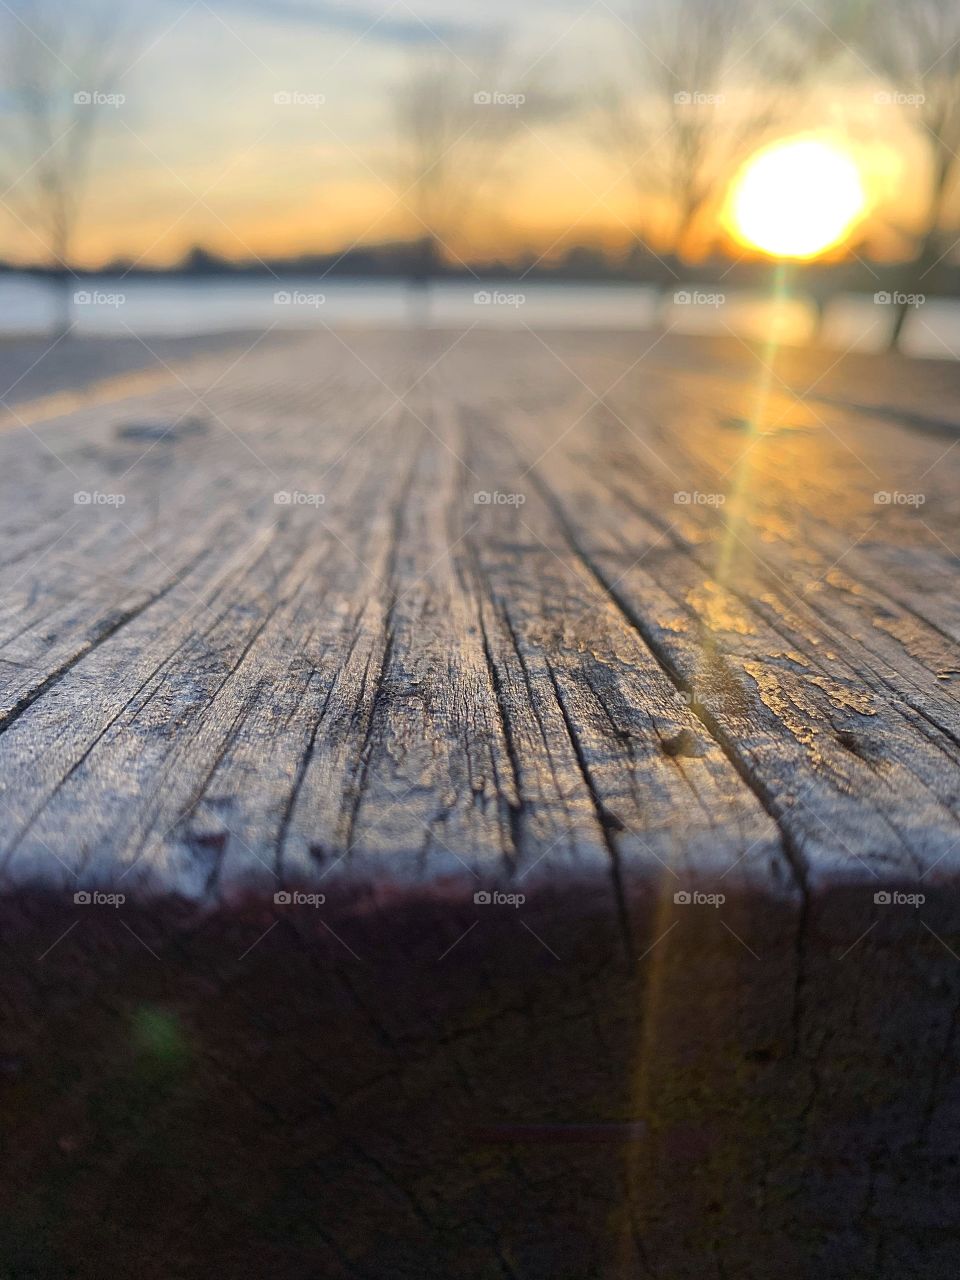 Sunset on Heritage Park, but the wood gets all the front view ☀️